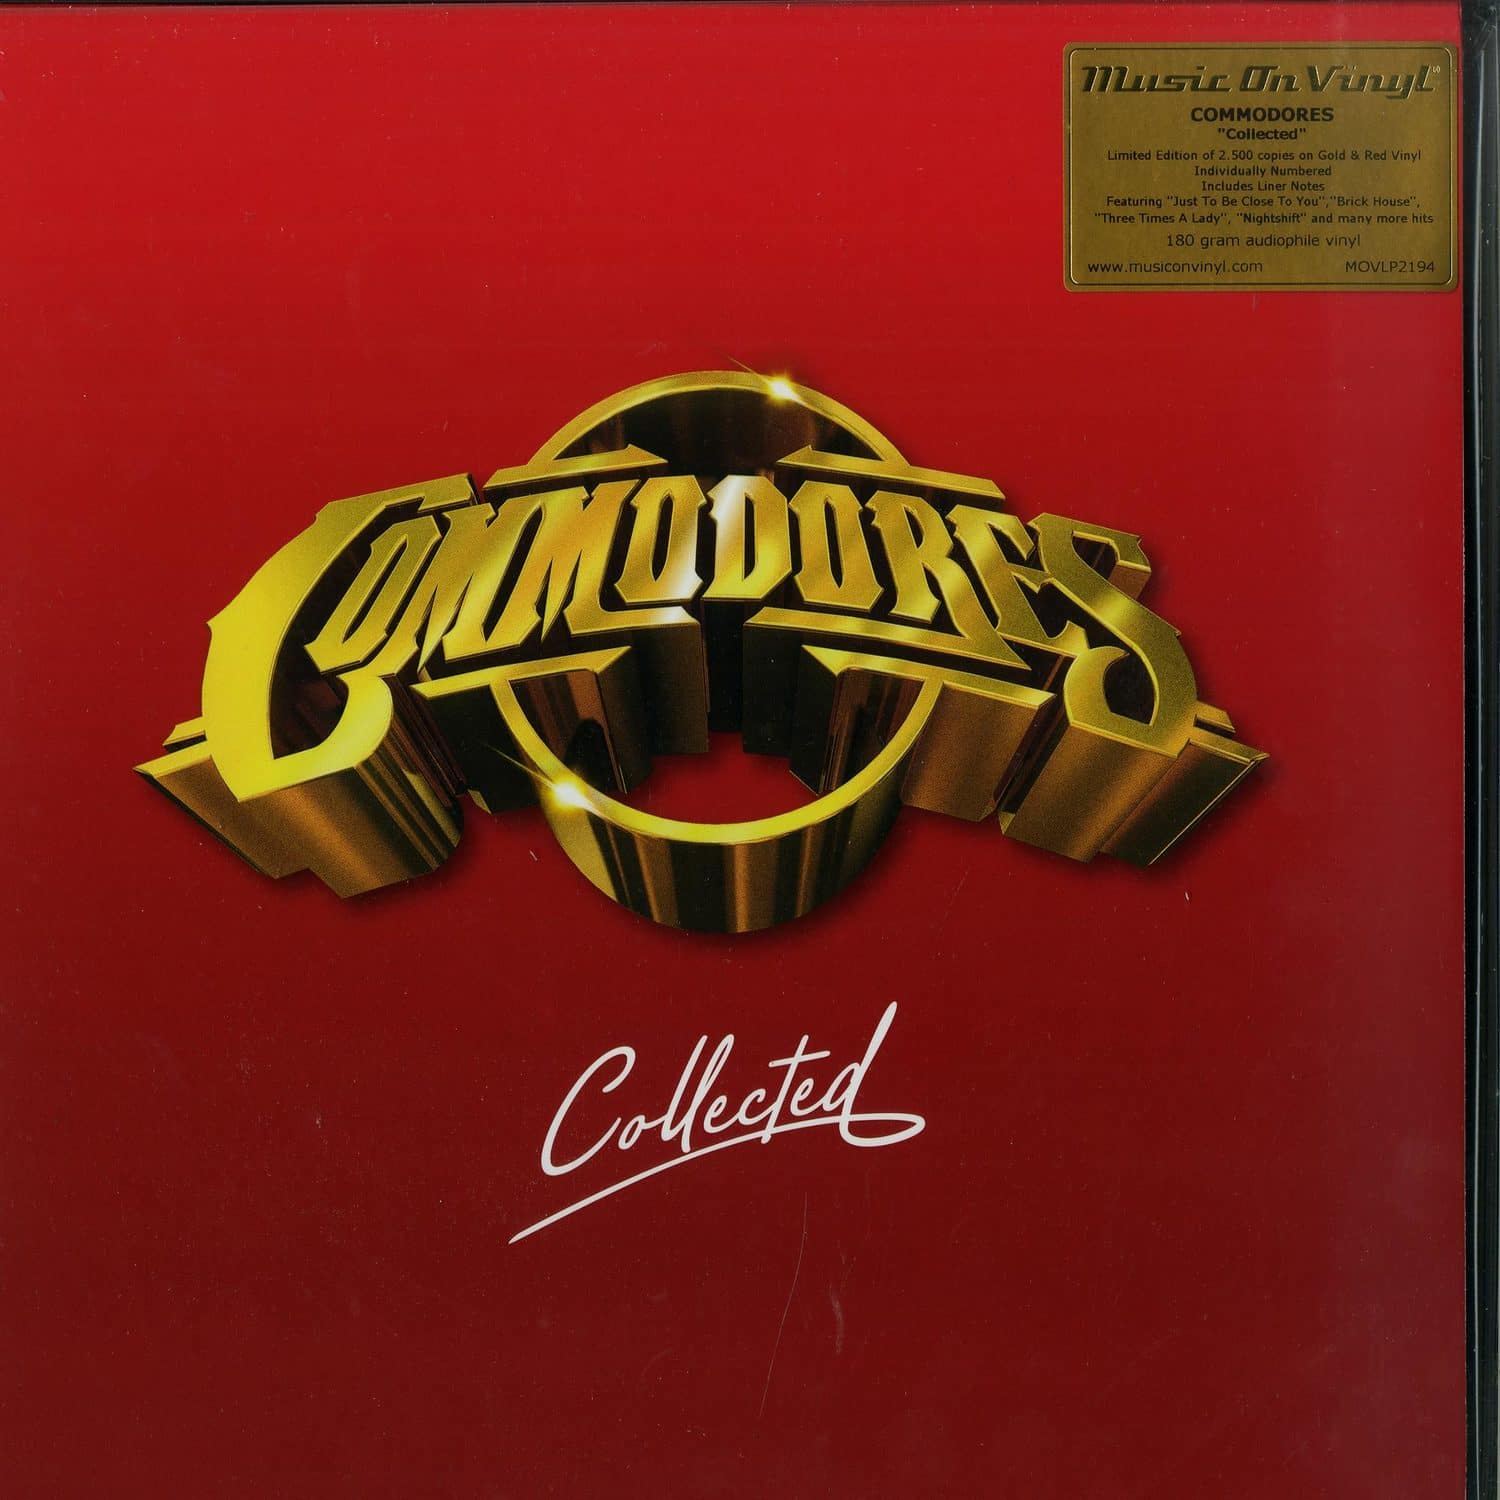 Commodores - COLLECTED 